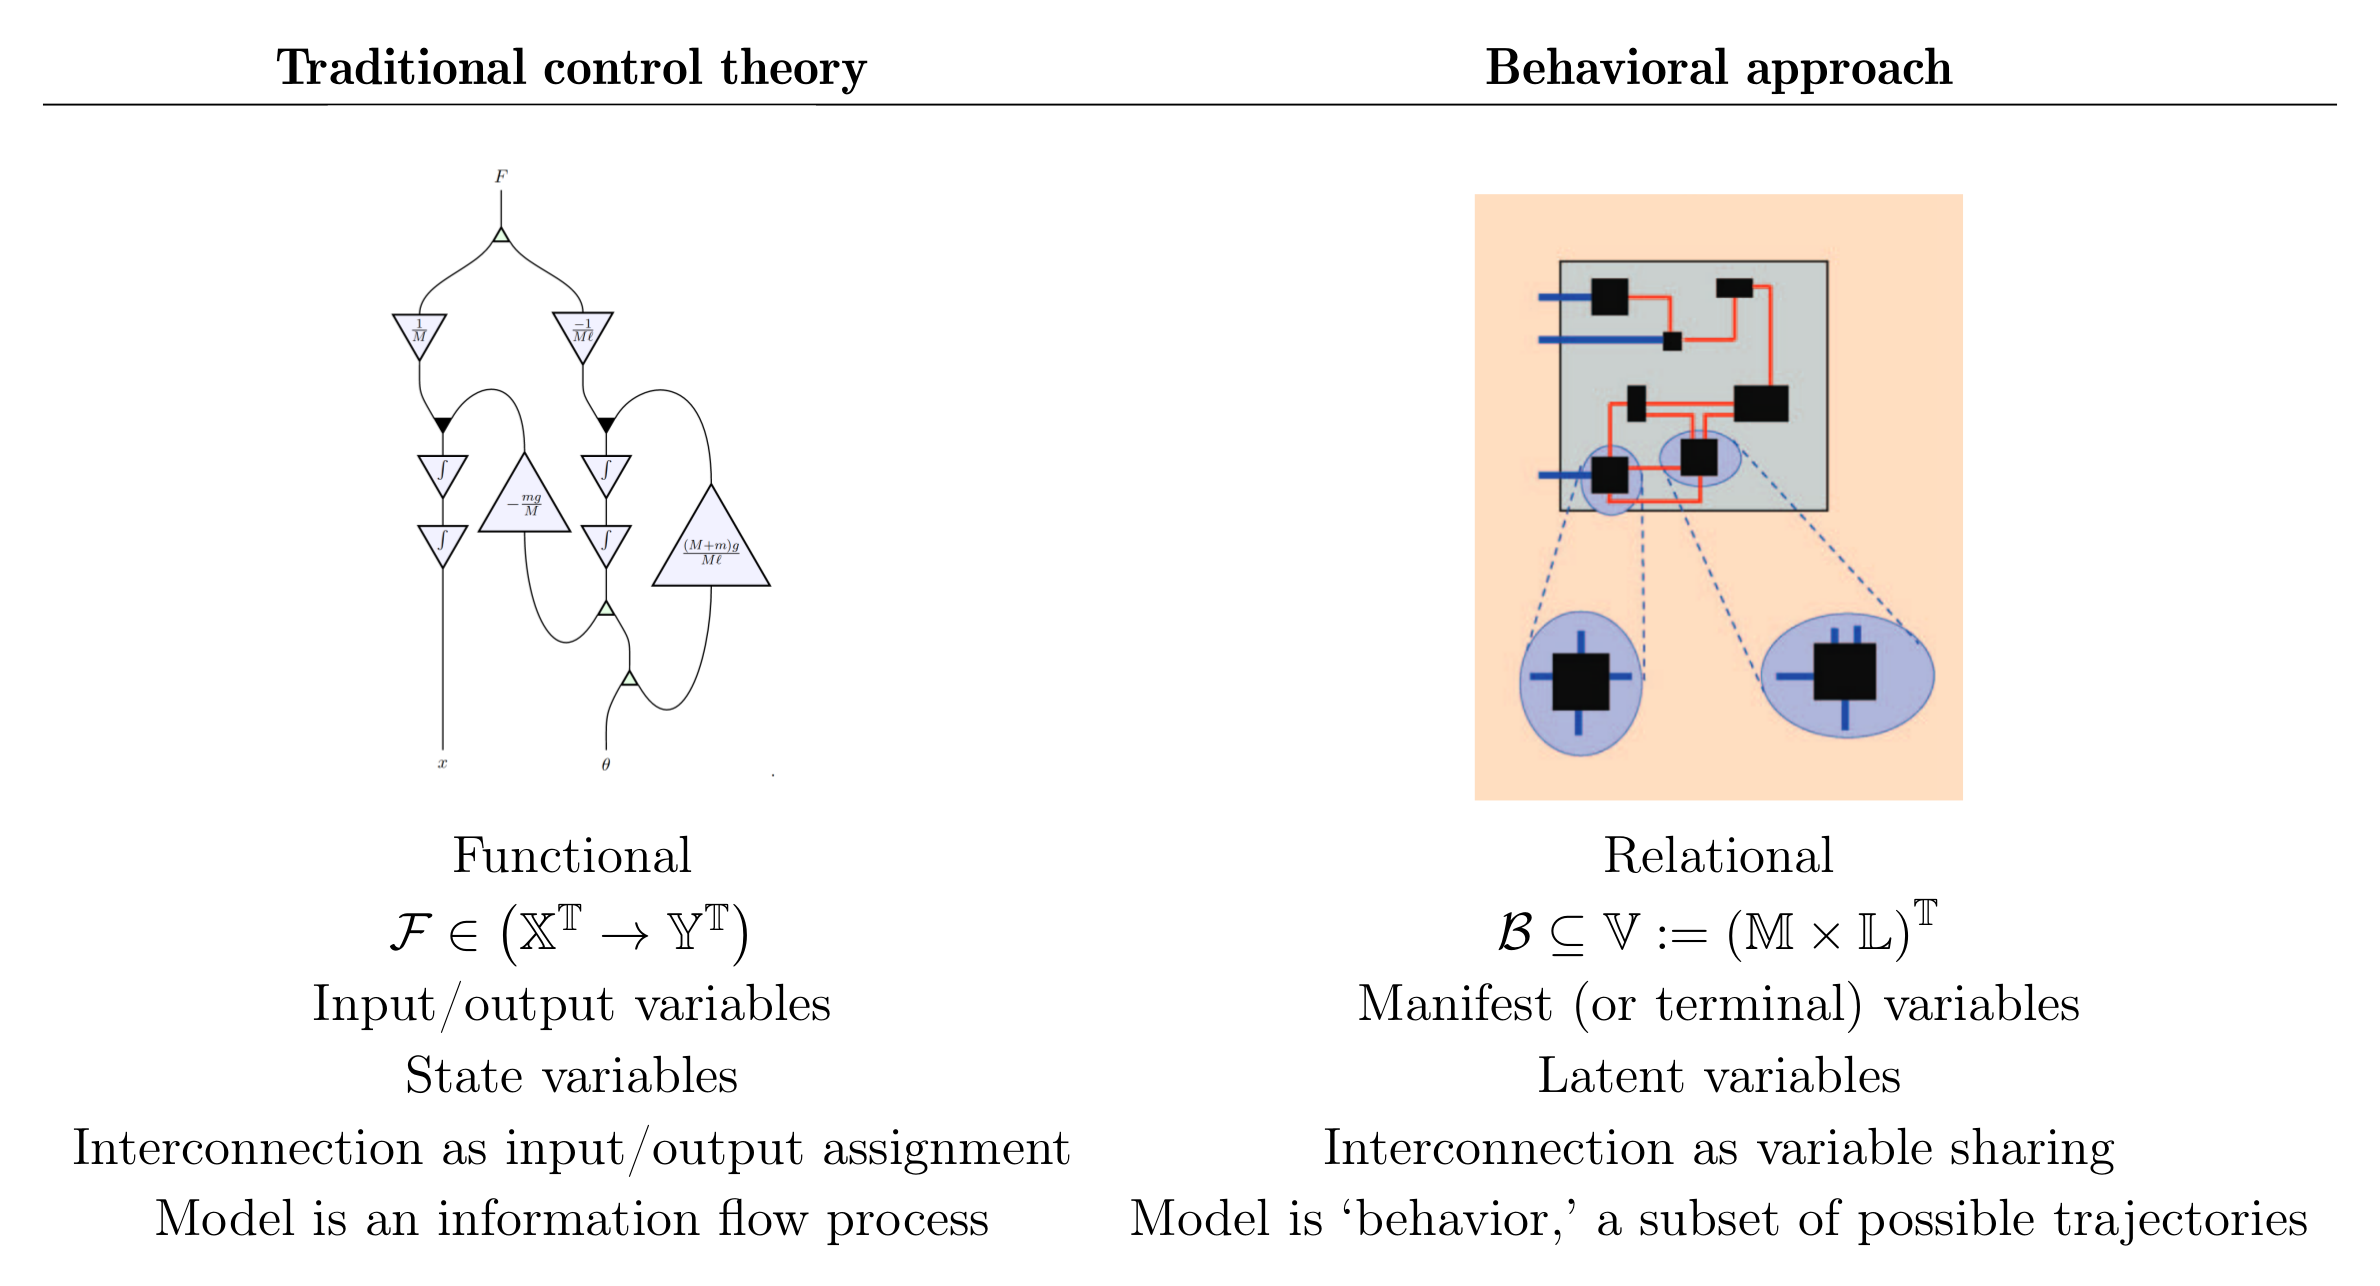 Image: Comparison table of traditional, functional approach vs Willems' relational approach